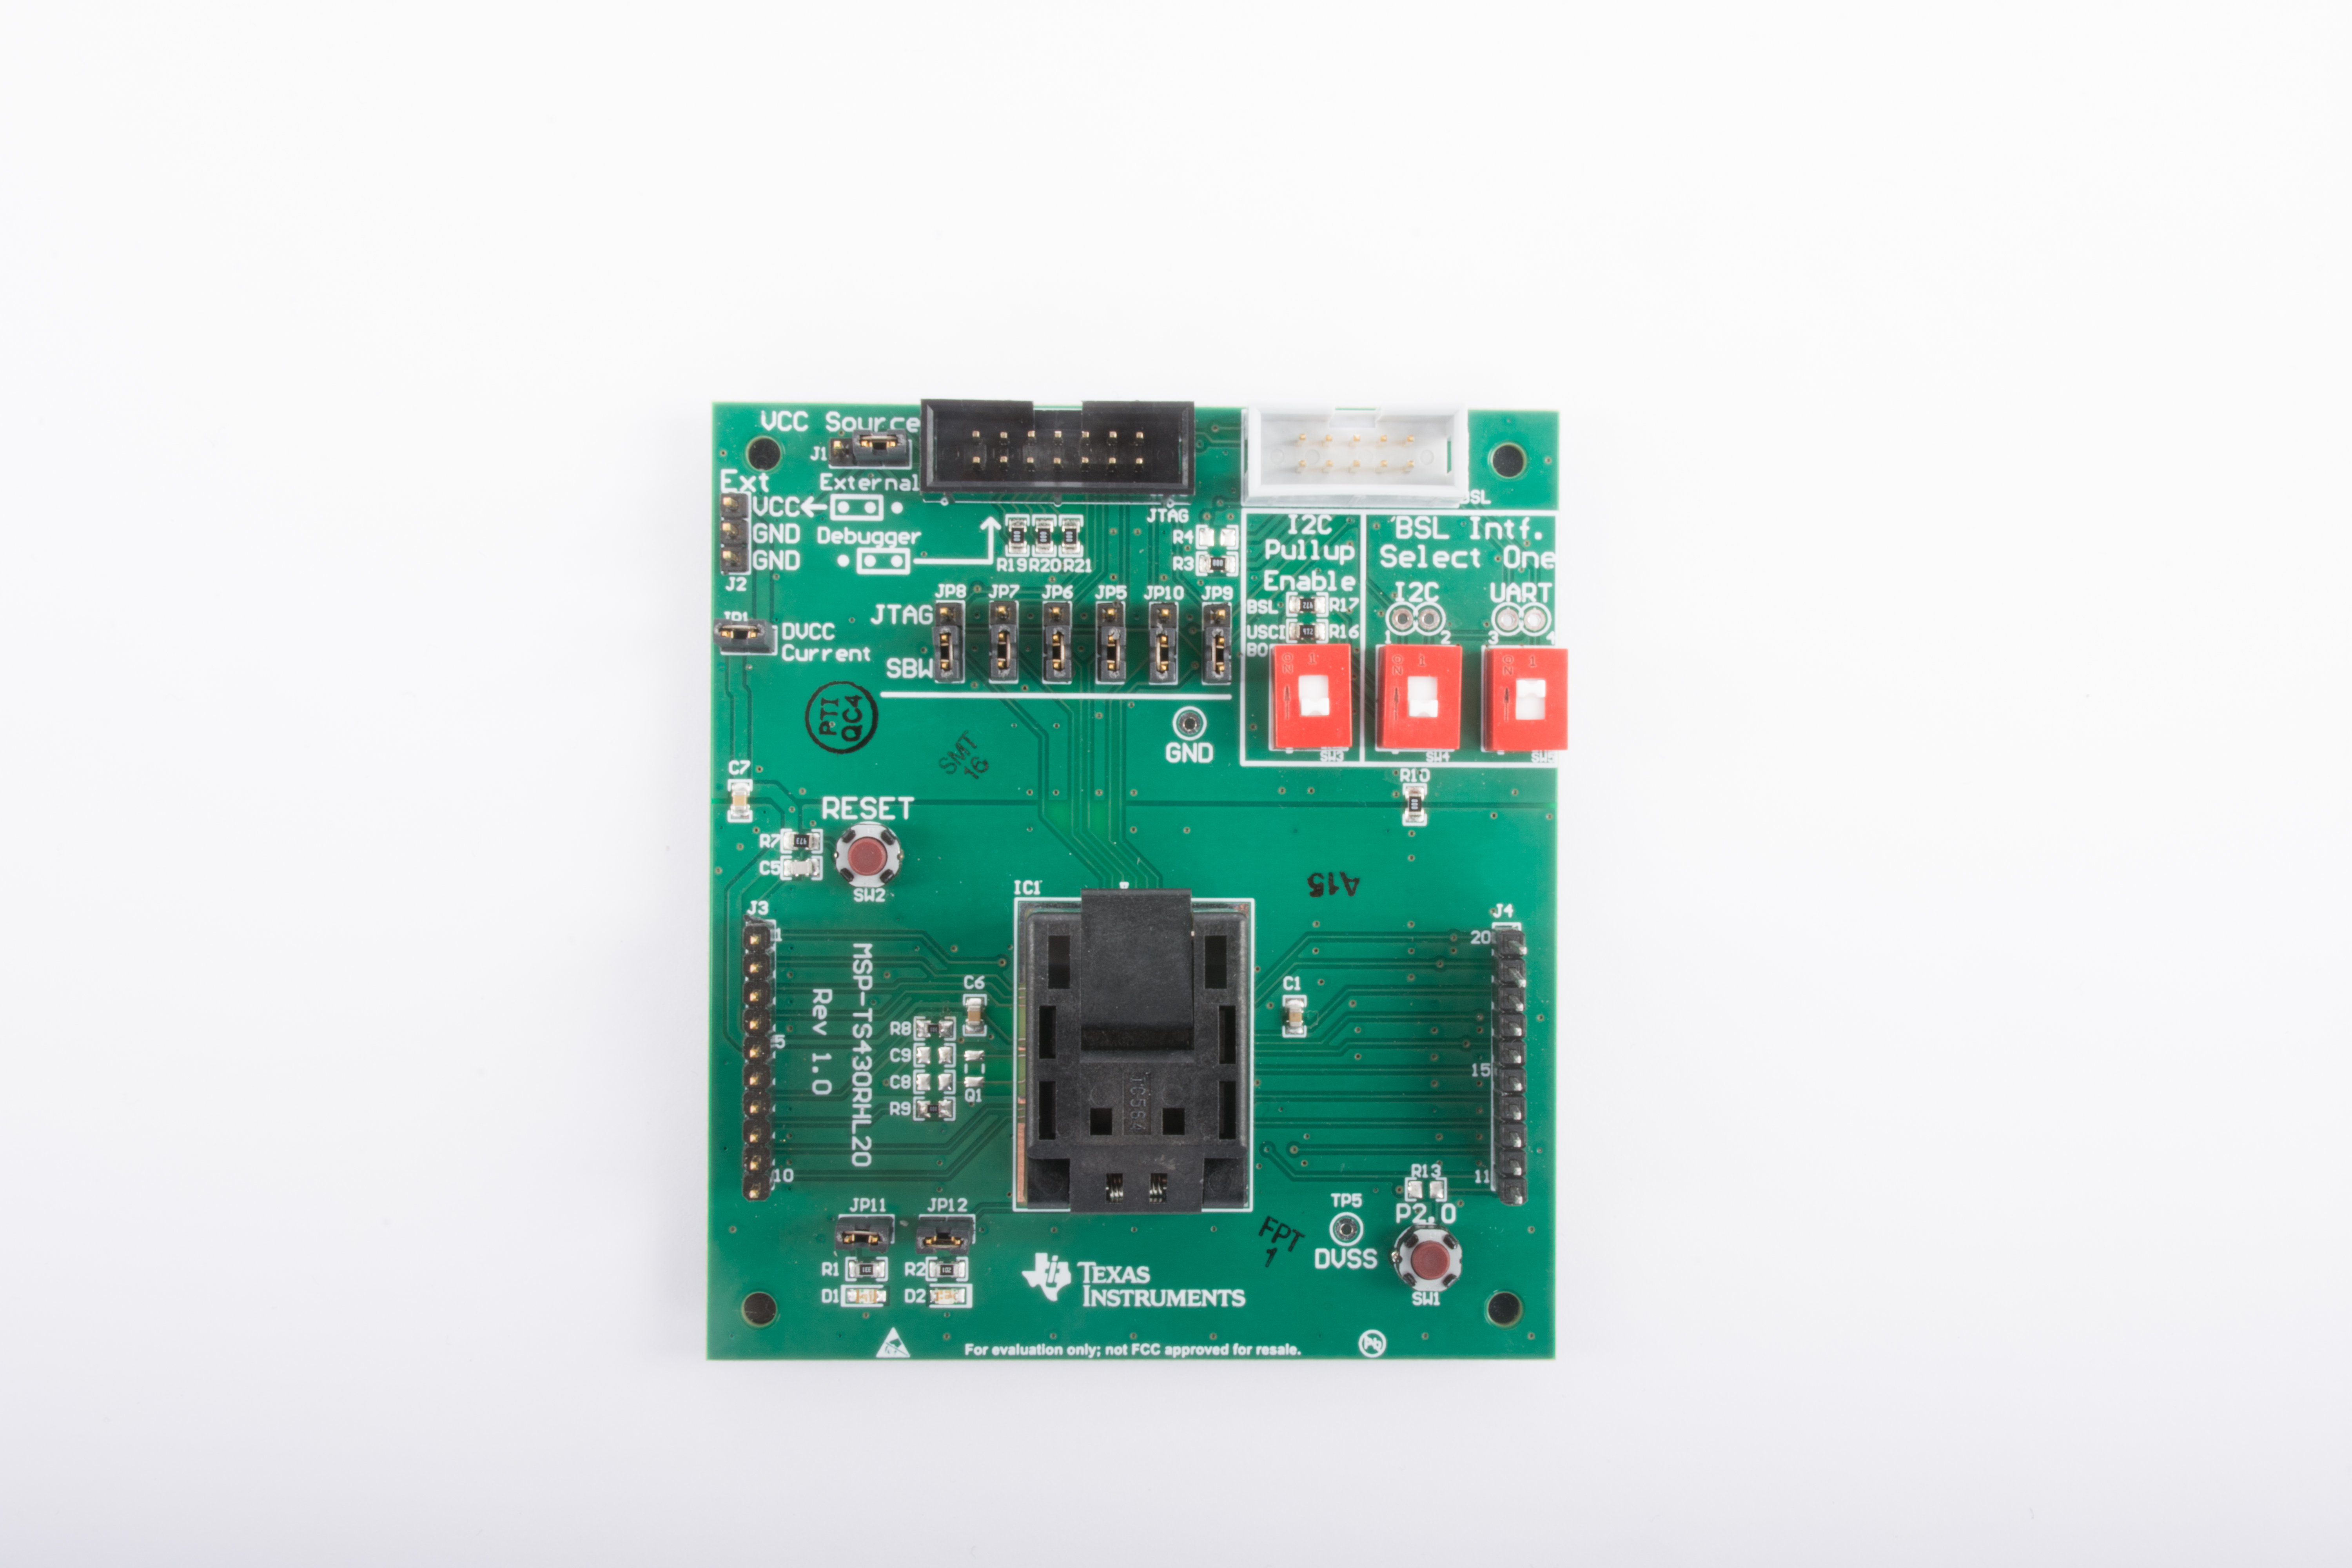 MSP-TS430RHL20 Target Development Board for MSP430FR2422 and MSP430FR25x2 MCUs-20-pin (microcontroller not included) top board image